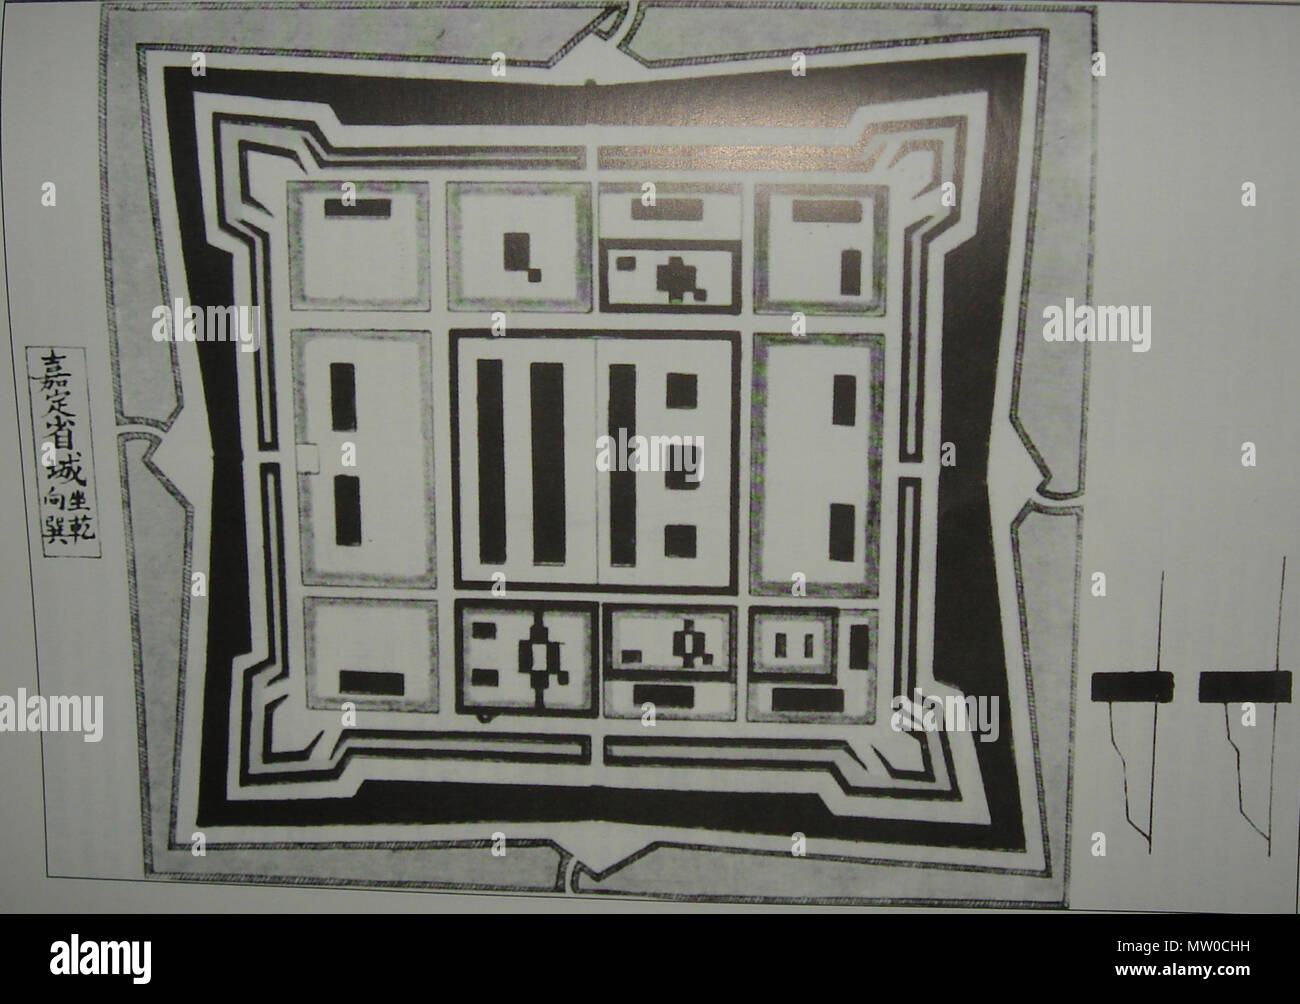 English: Layout of the reconstructed citadel of Sai Gon after the first  demolition by Emperor Minh Mang in Dai Nam Nhat Thong Chi (Dai Nam  administrative repertory), a 19th century repertory